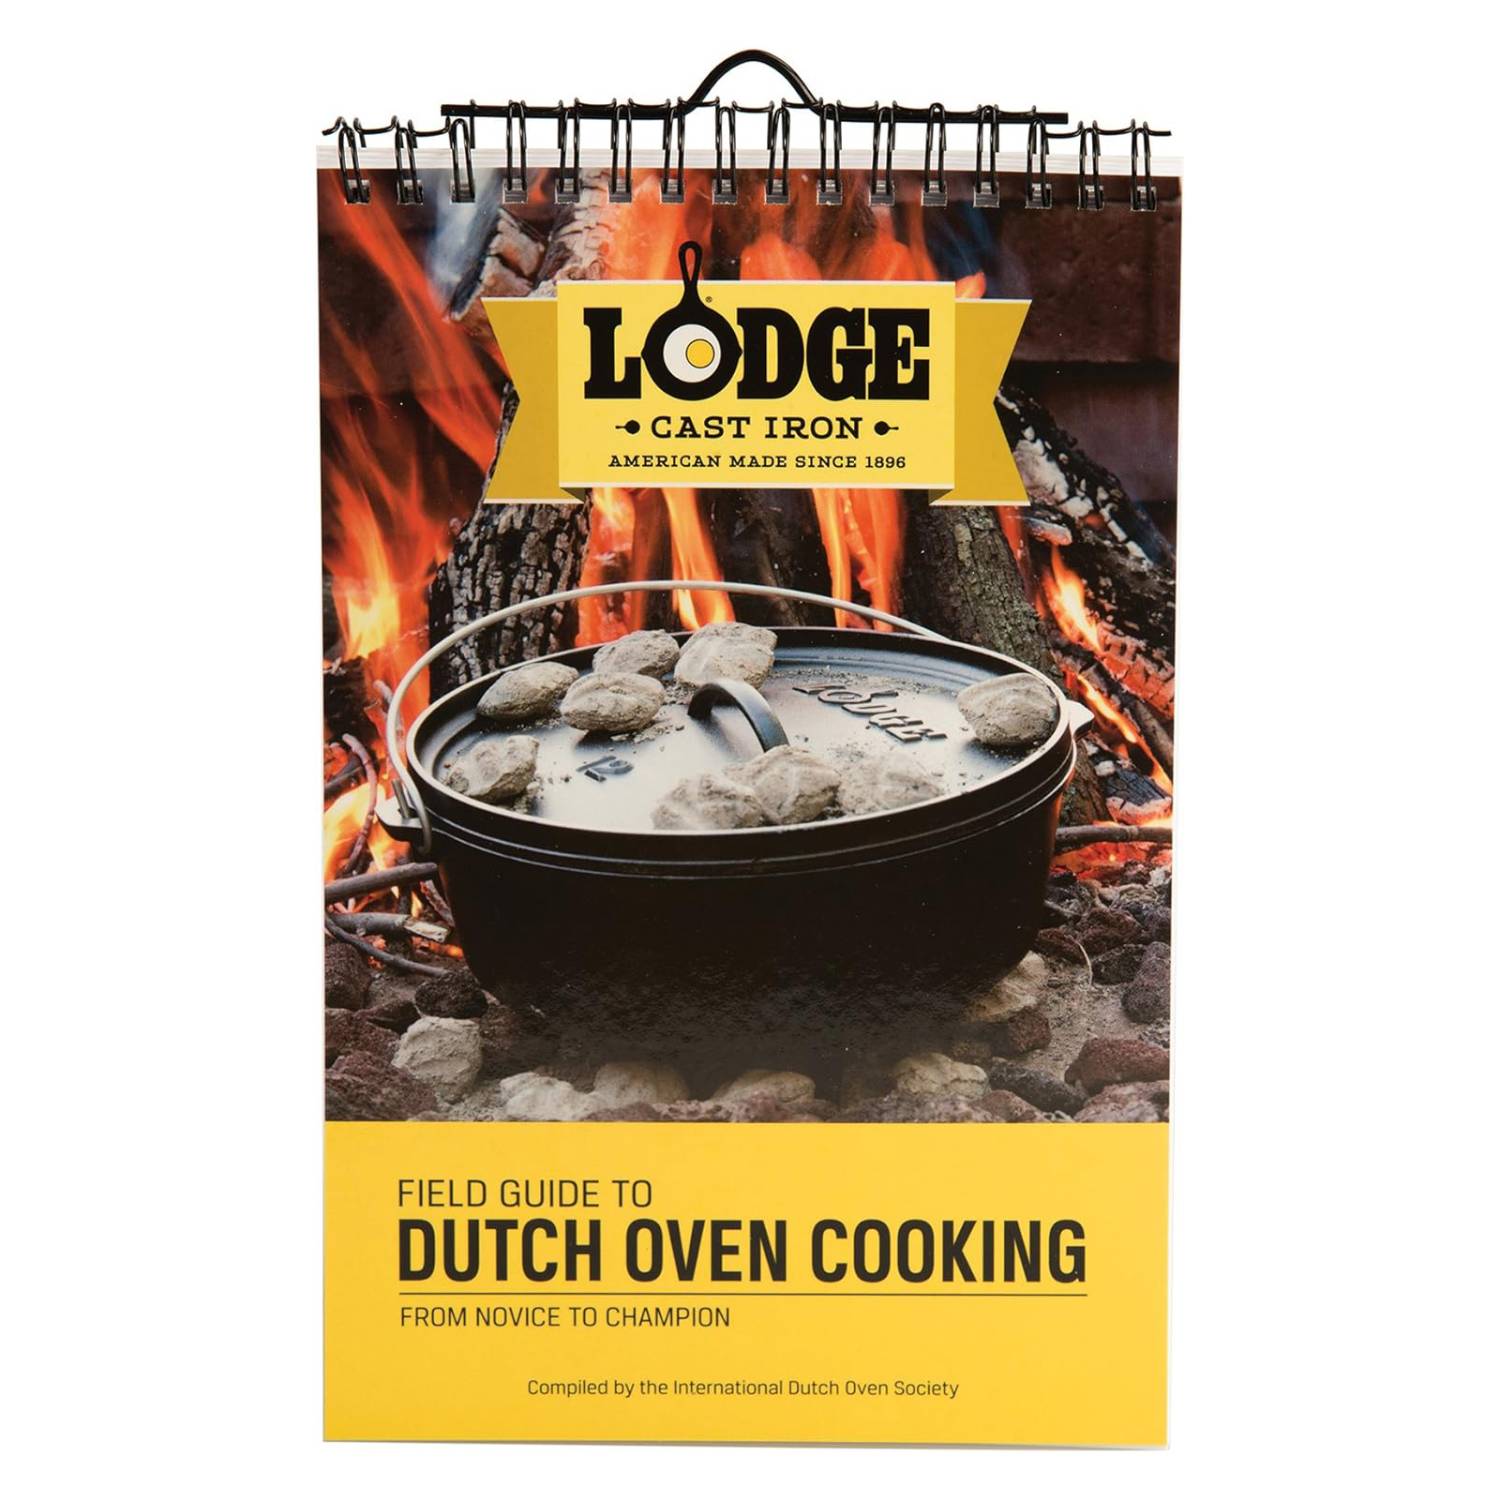 Dutch Oven Cooking, Dutch Oven Tips and Recipes